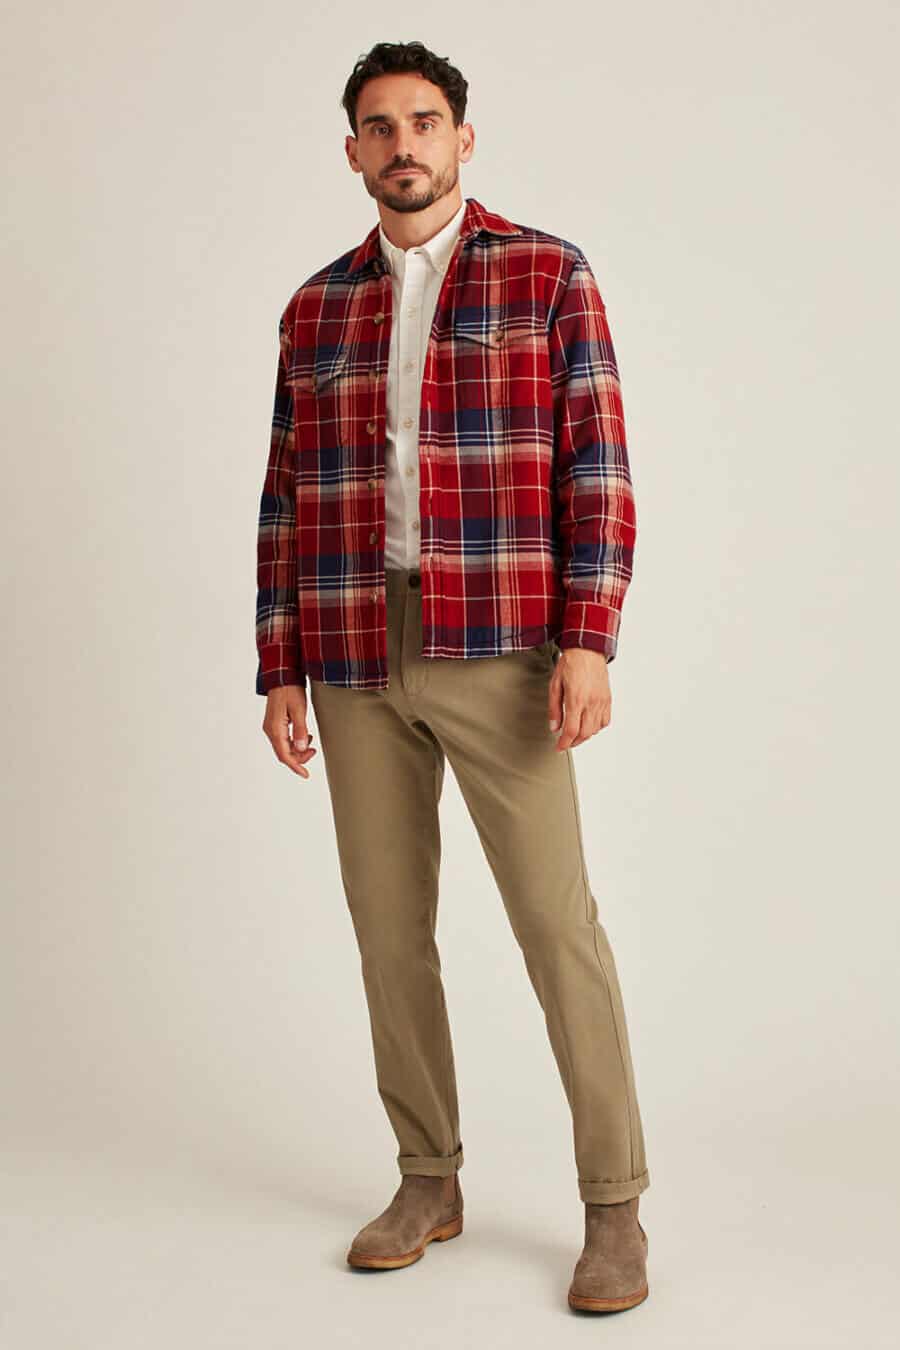 Men's lumberjack flannel shirt outfit with khaki pants and boots